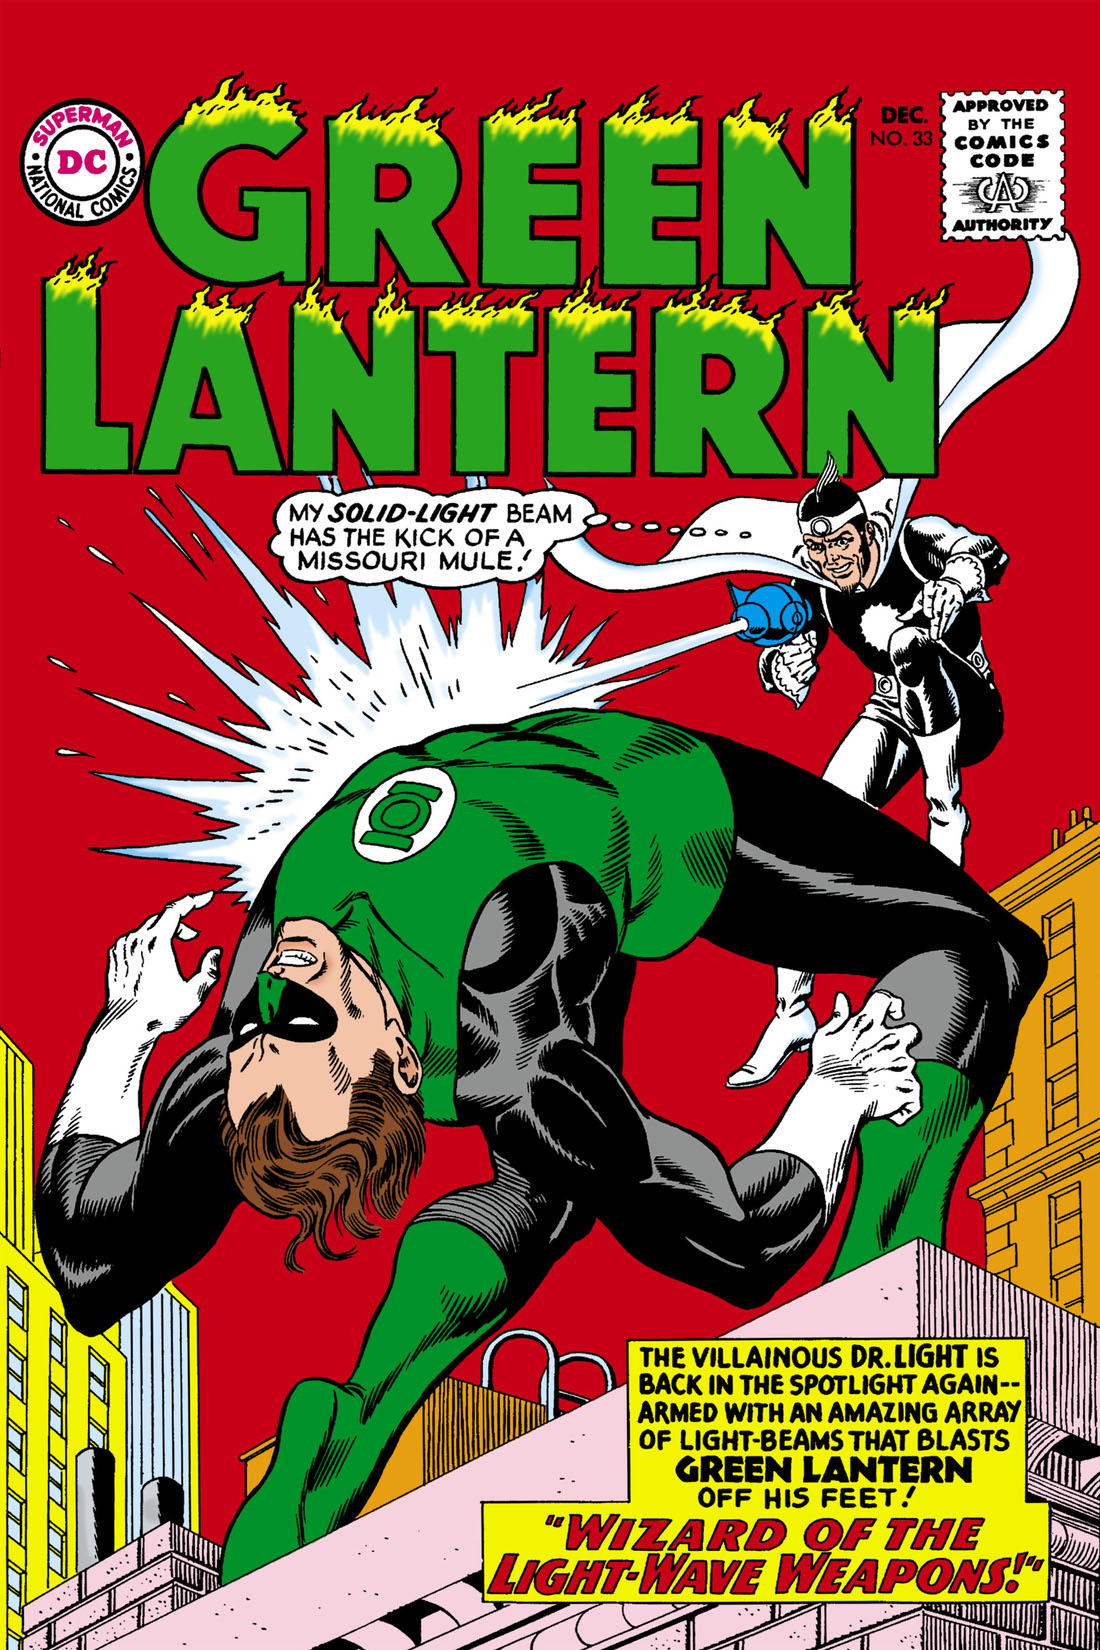 Green Lantern (1960-) #33 preview images